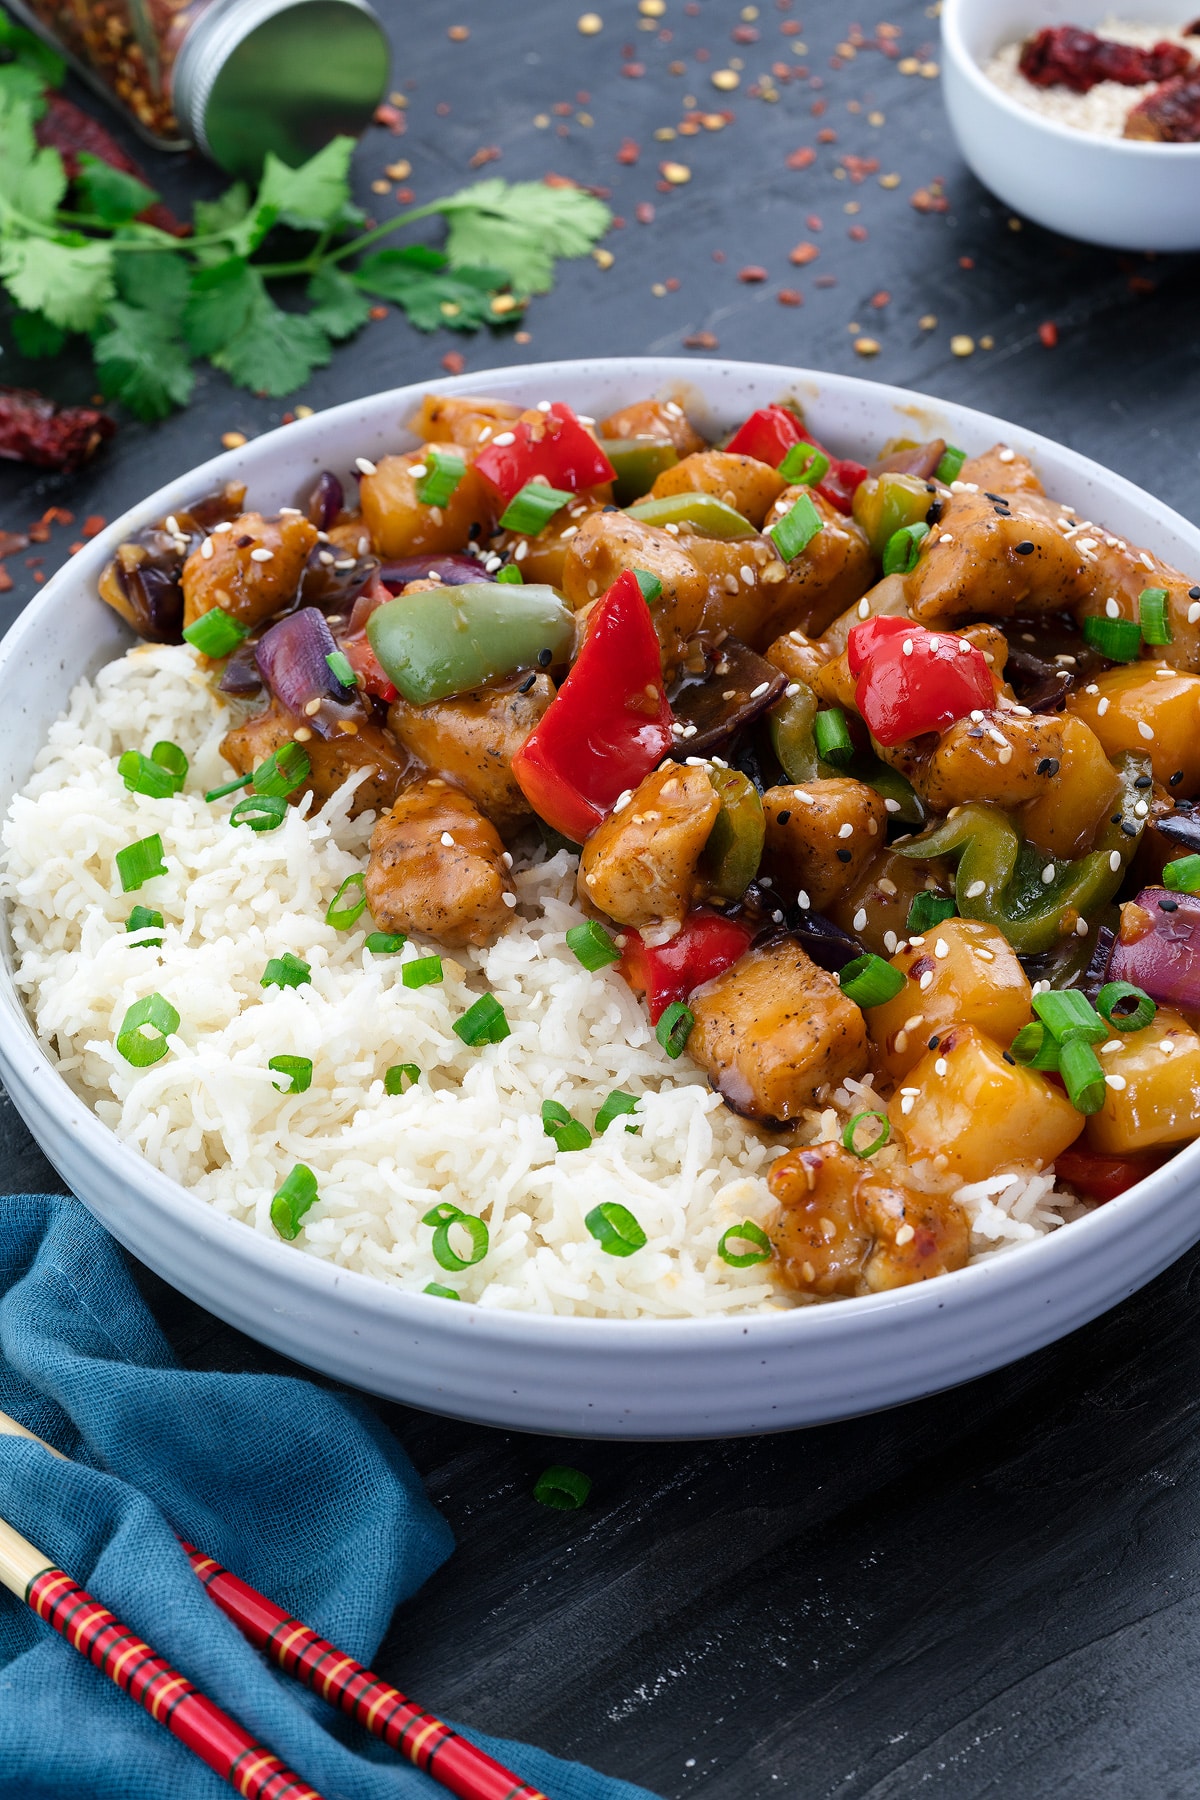 Sweet and Sour Chicken served in a white bowl along with rice with few ingredients scatterred around.